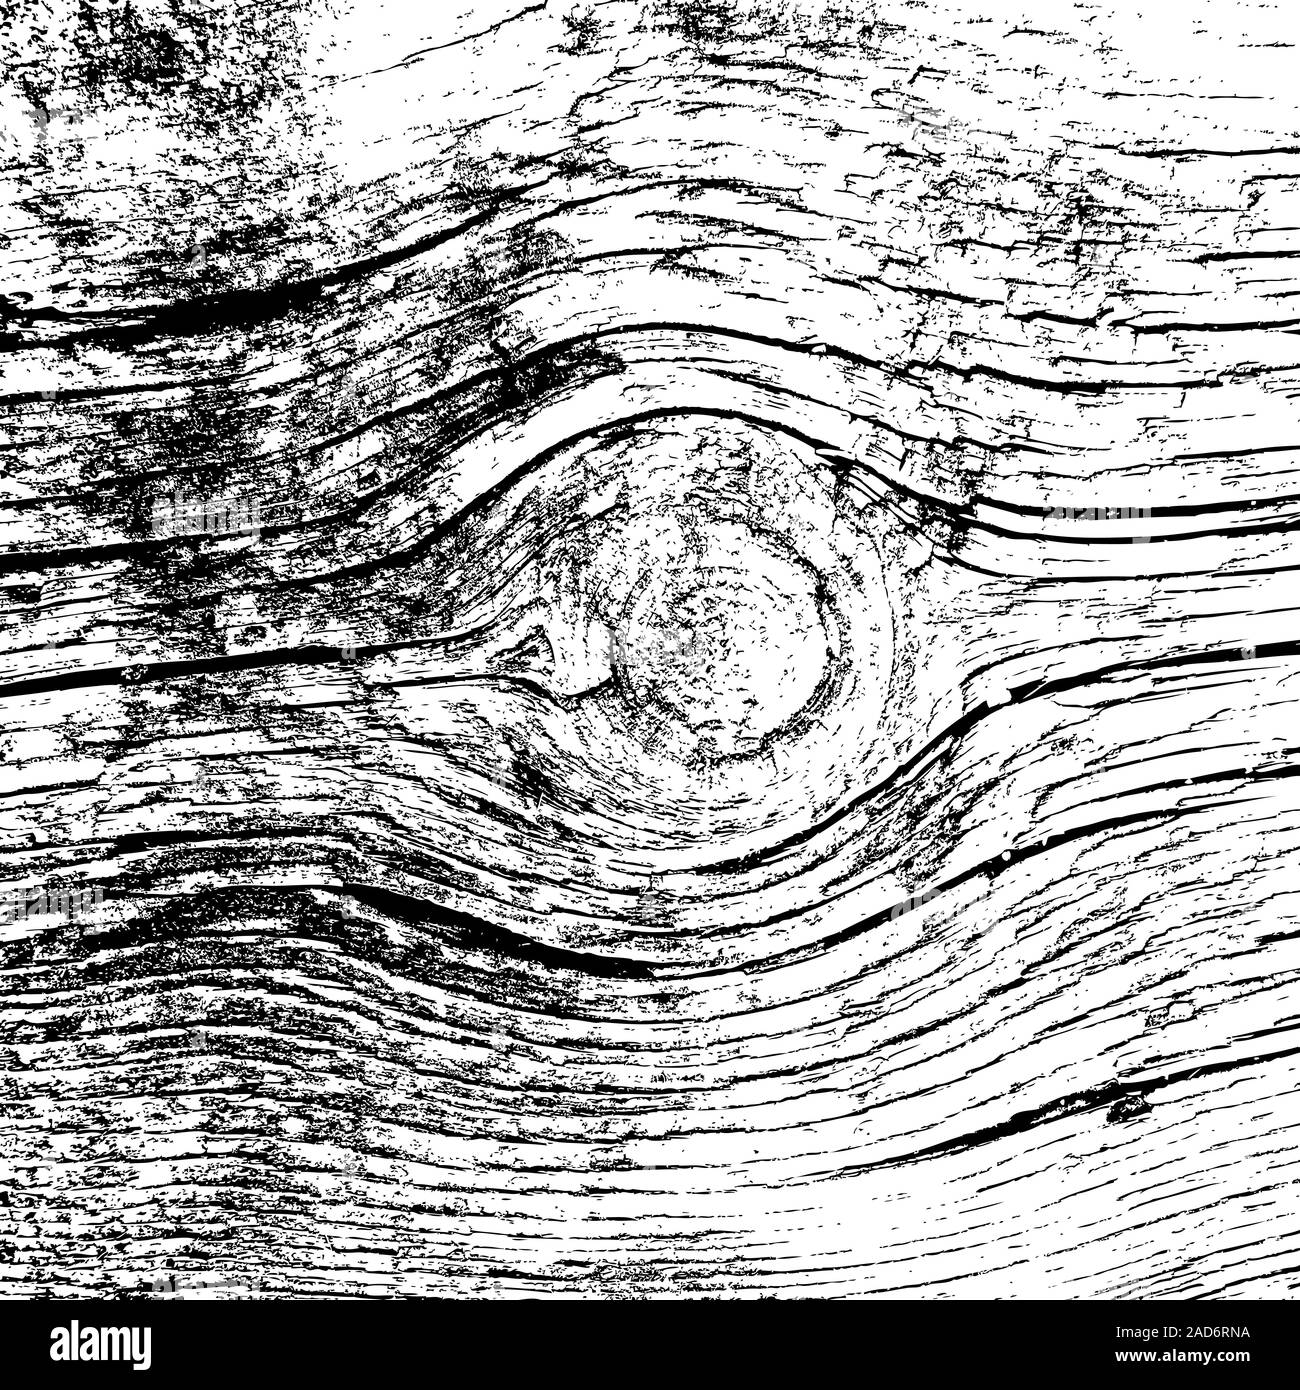 How to Draw a Wood Texture - YouTube